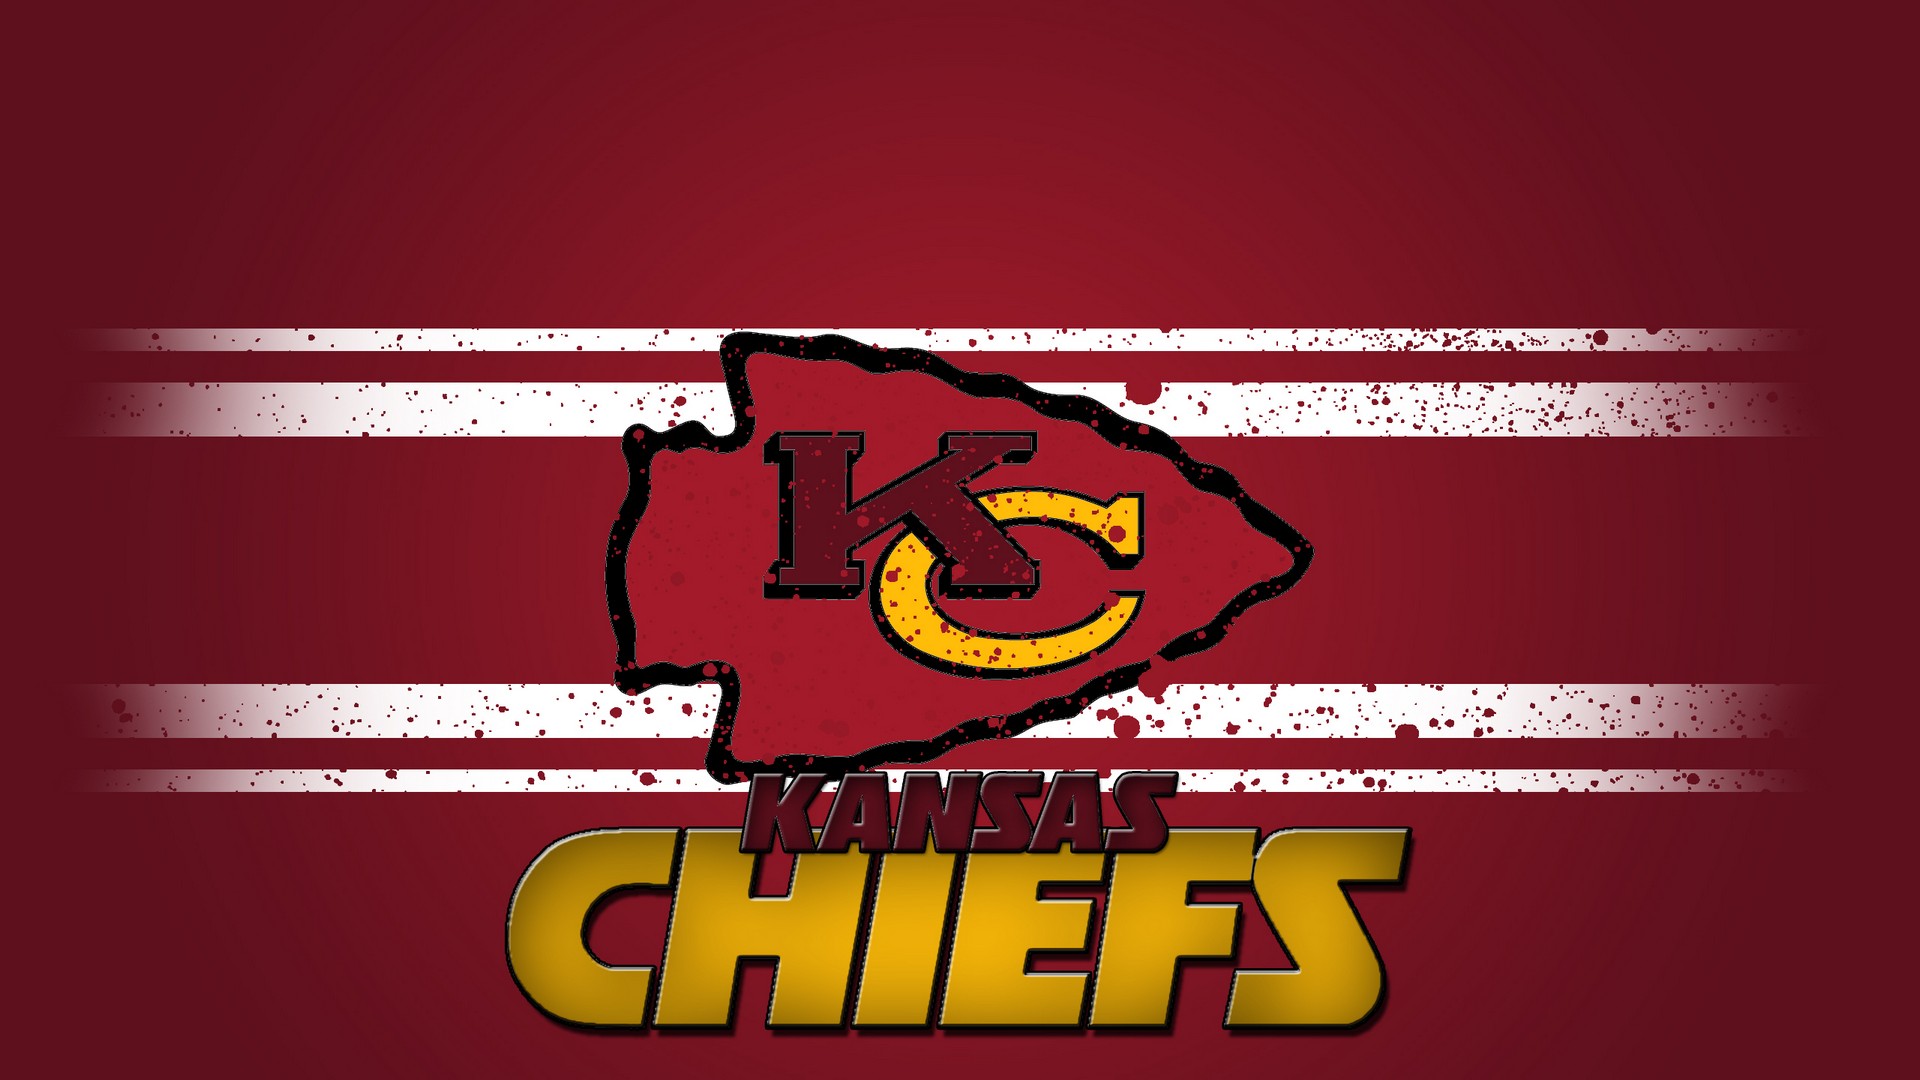 HD Desktop Wallpaper Kansas City Chiefs With Resolution 1920X1080 pixel. You can make this wallpaper for your Mac or Windows Desktop Background, iPhone, Android or Tablet and another Smartphone device for free